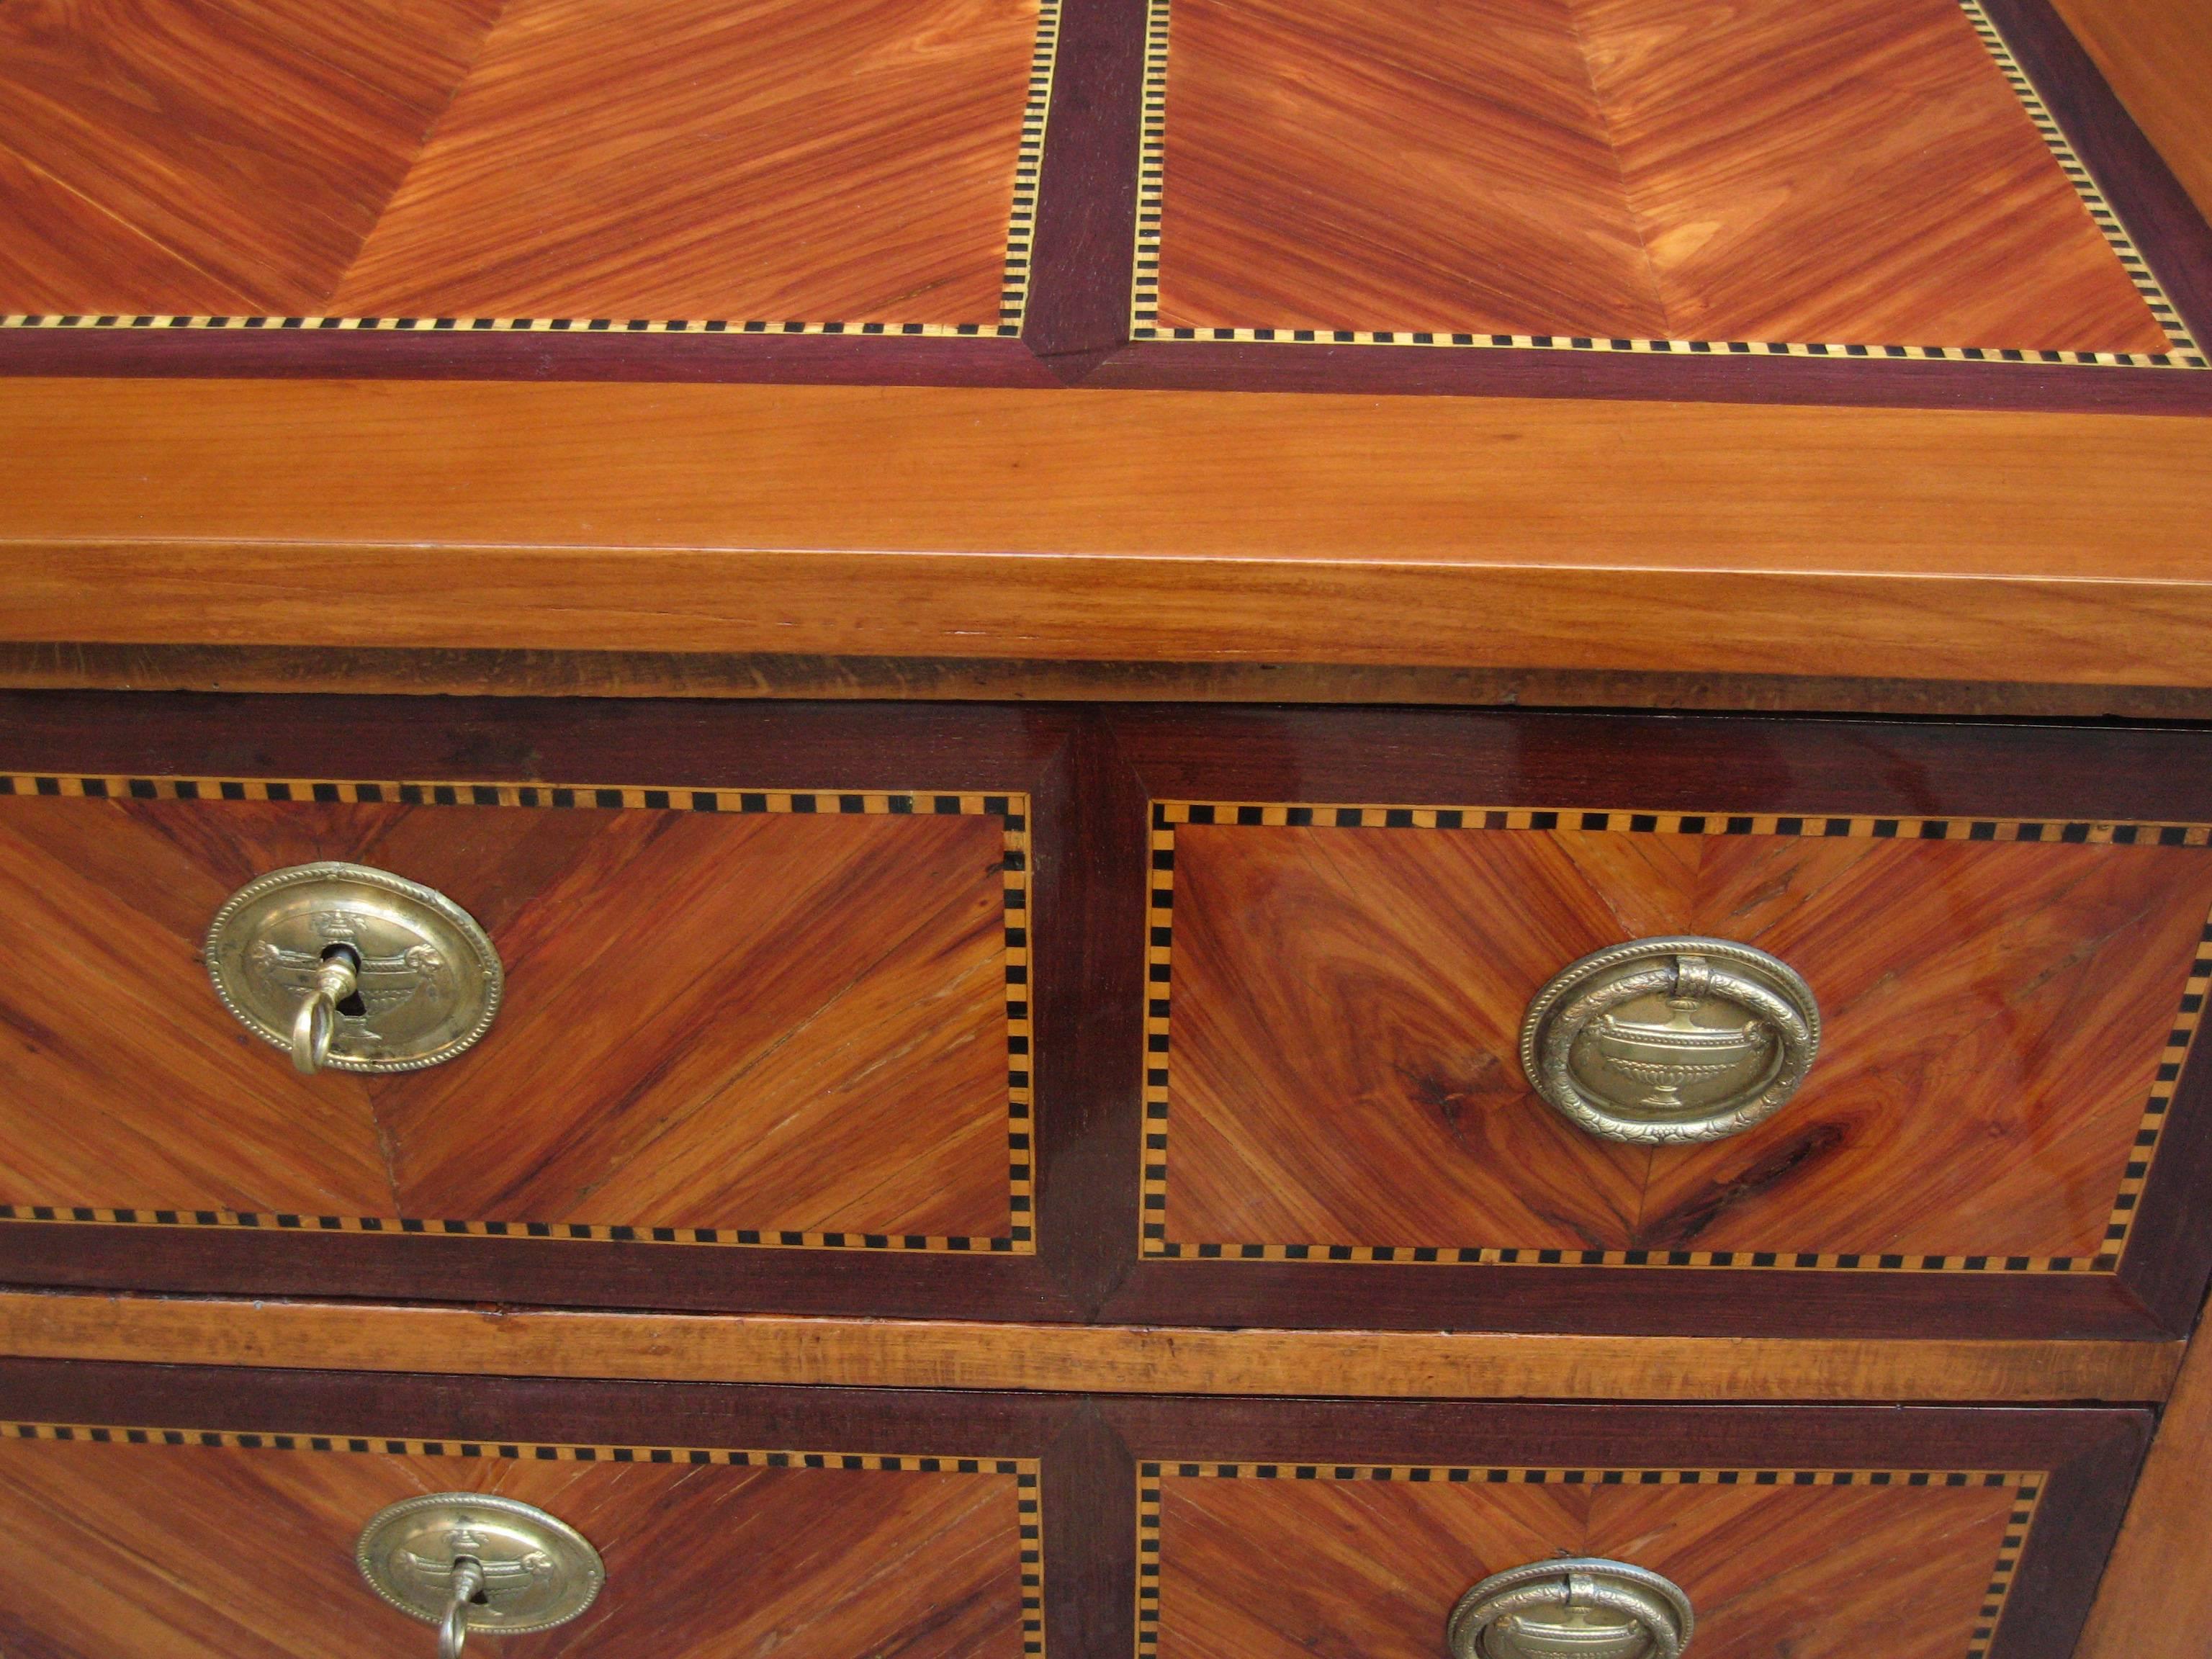 A fine neoclassical chest of drawers.
Mahogany with marquetry inlay and fruitwood inlay 
details with patinated bronze pulls and escutcheons.